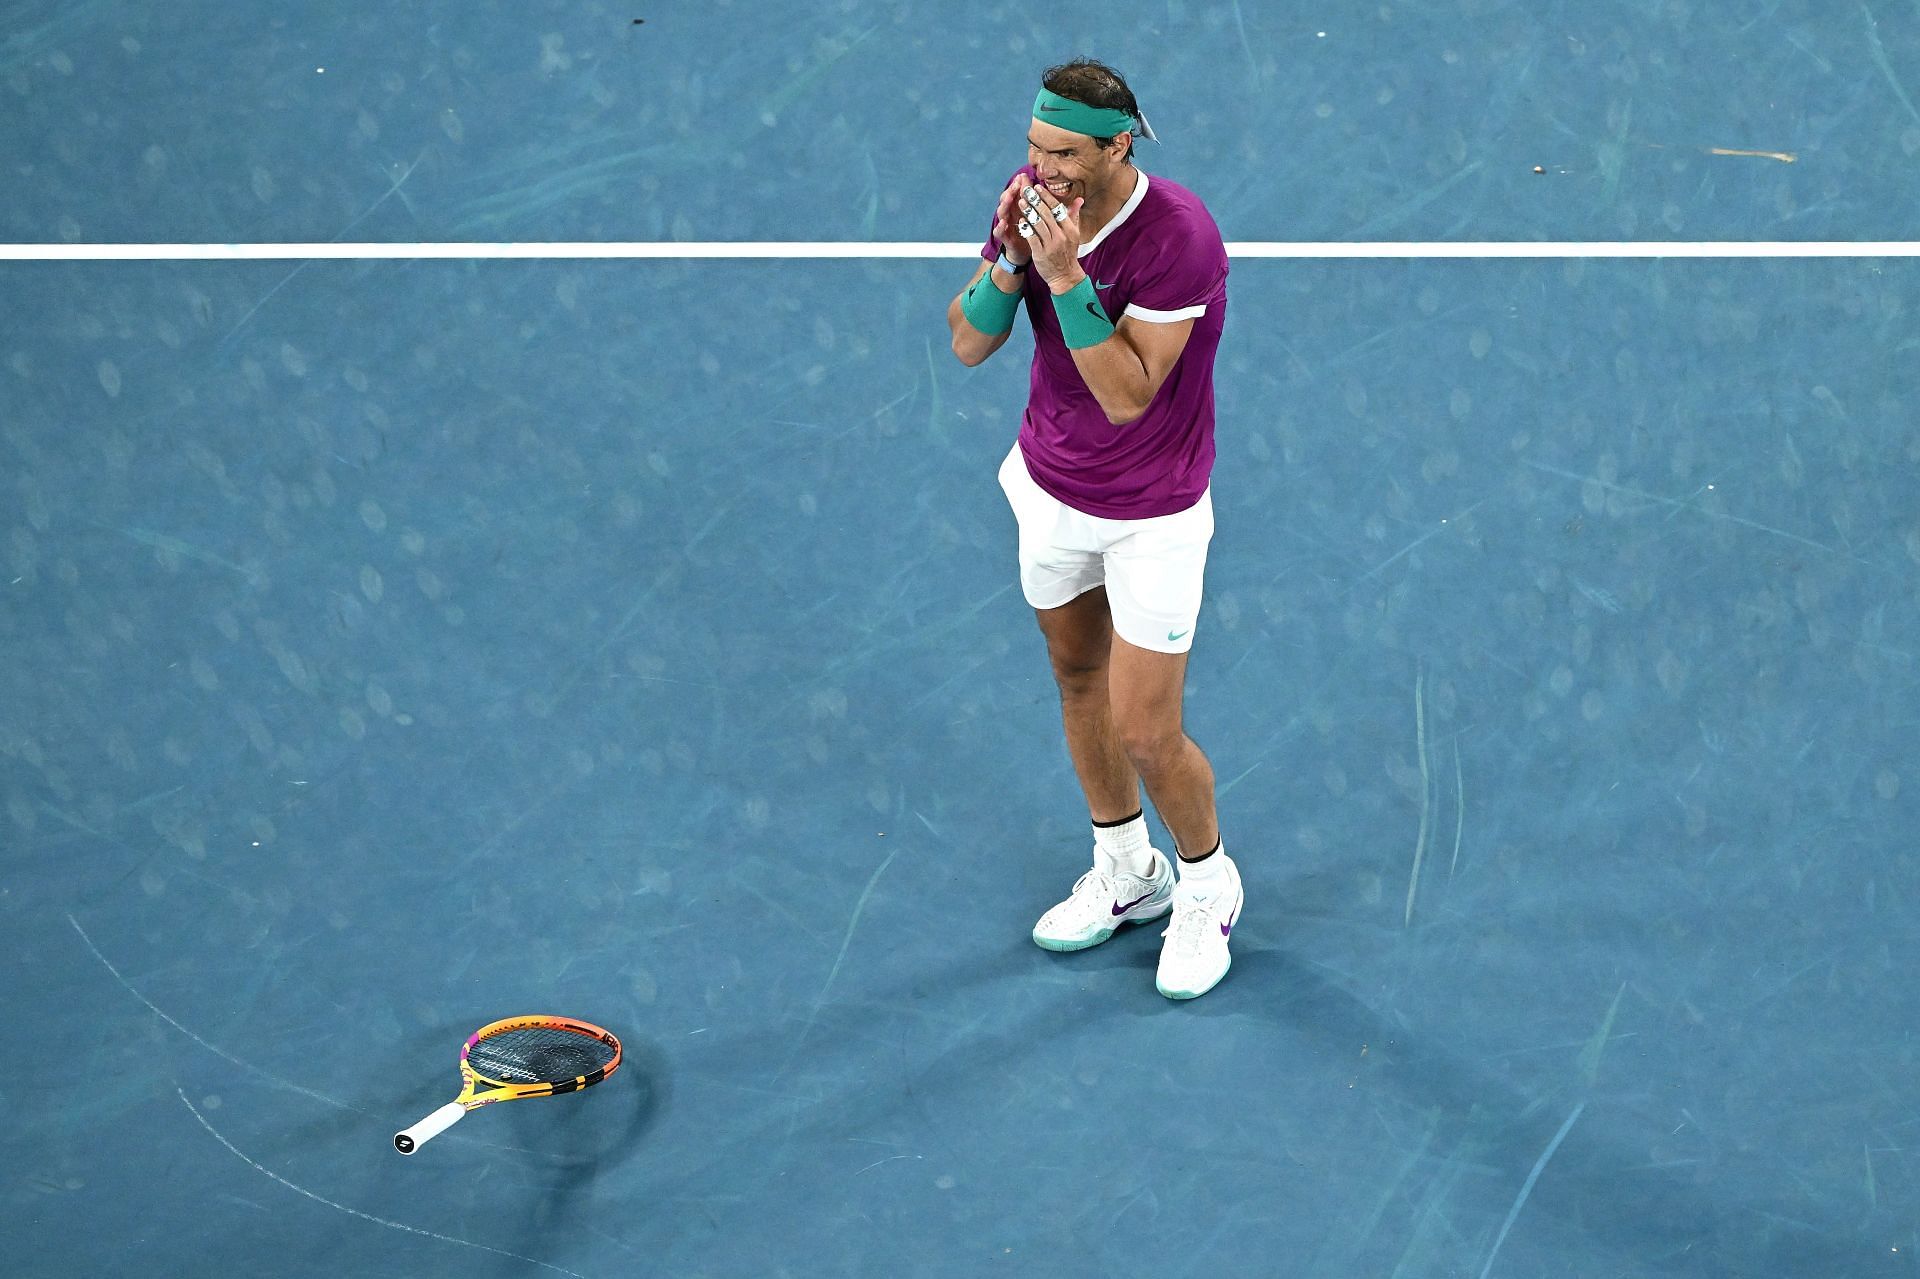 Nadal produced a maginificent display to win his 21st Grand Slam title